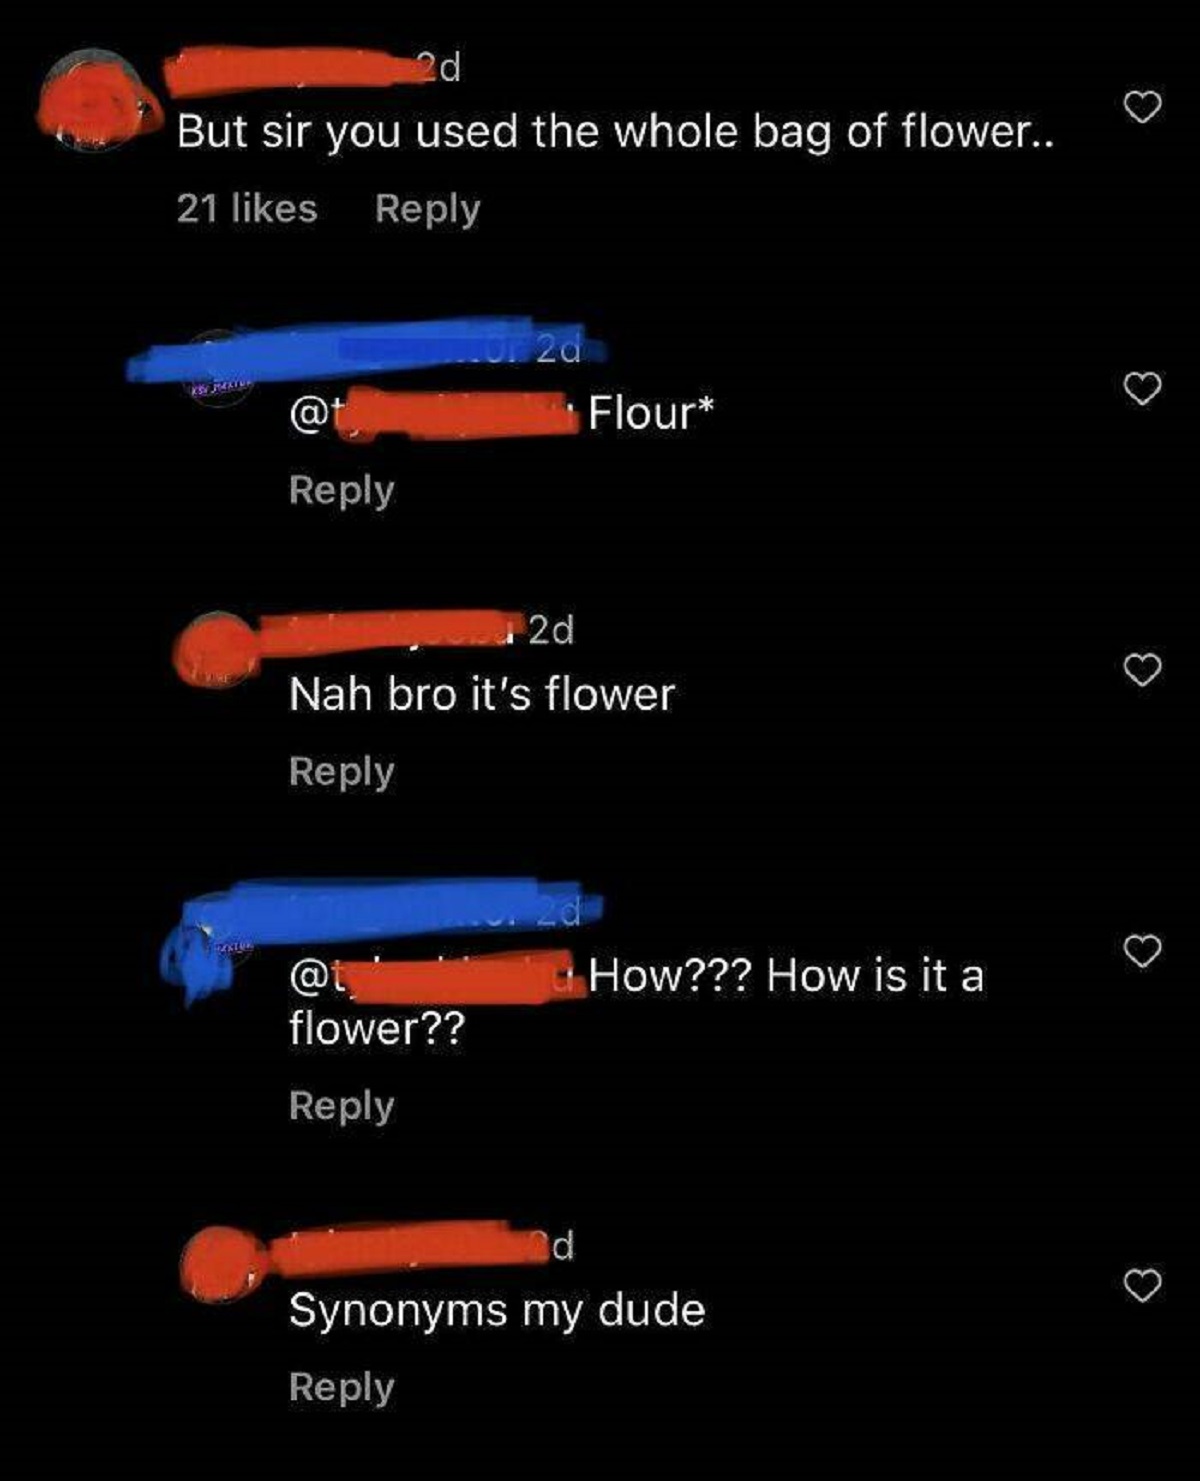 screenshot - 2d But sir you used the whole bag of flower.. 21 102d @ Flour 2d Nah bro it's flower How??? How is it a flower?? d Synonyms my dude 3